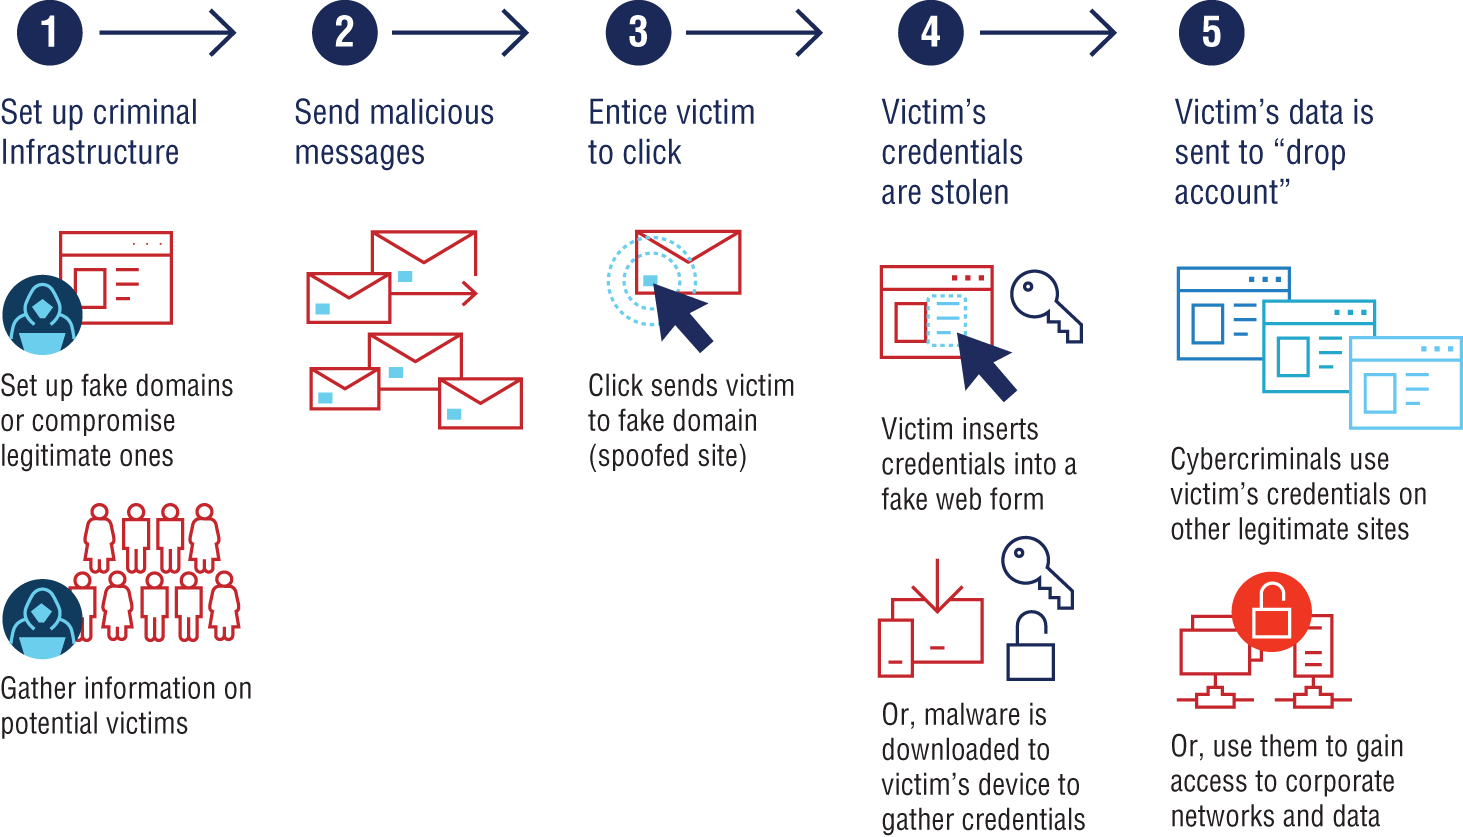 Schematic illustration of Phishing lifecycle implemented by cybercriminals